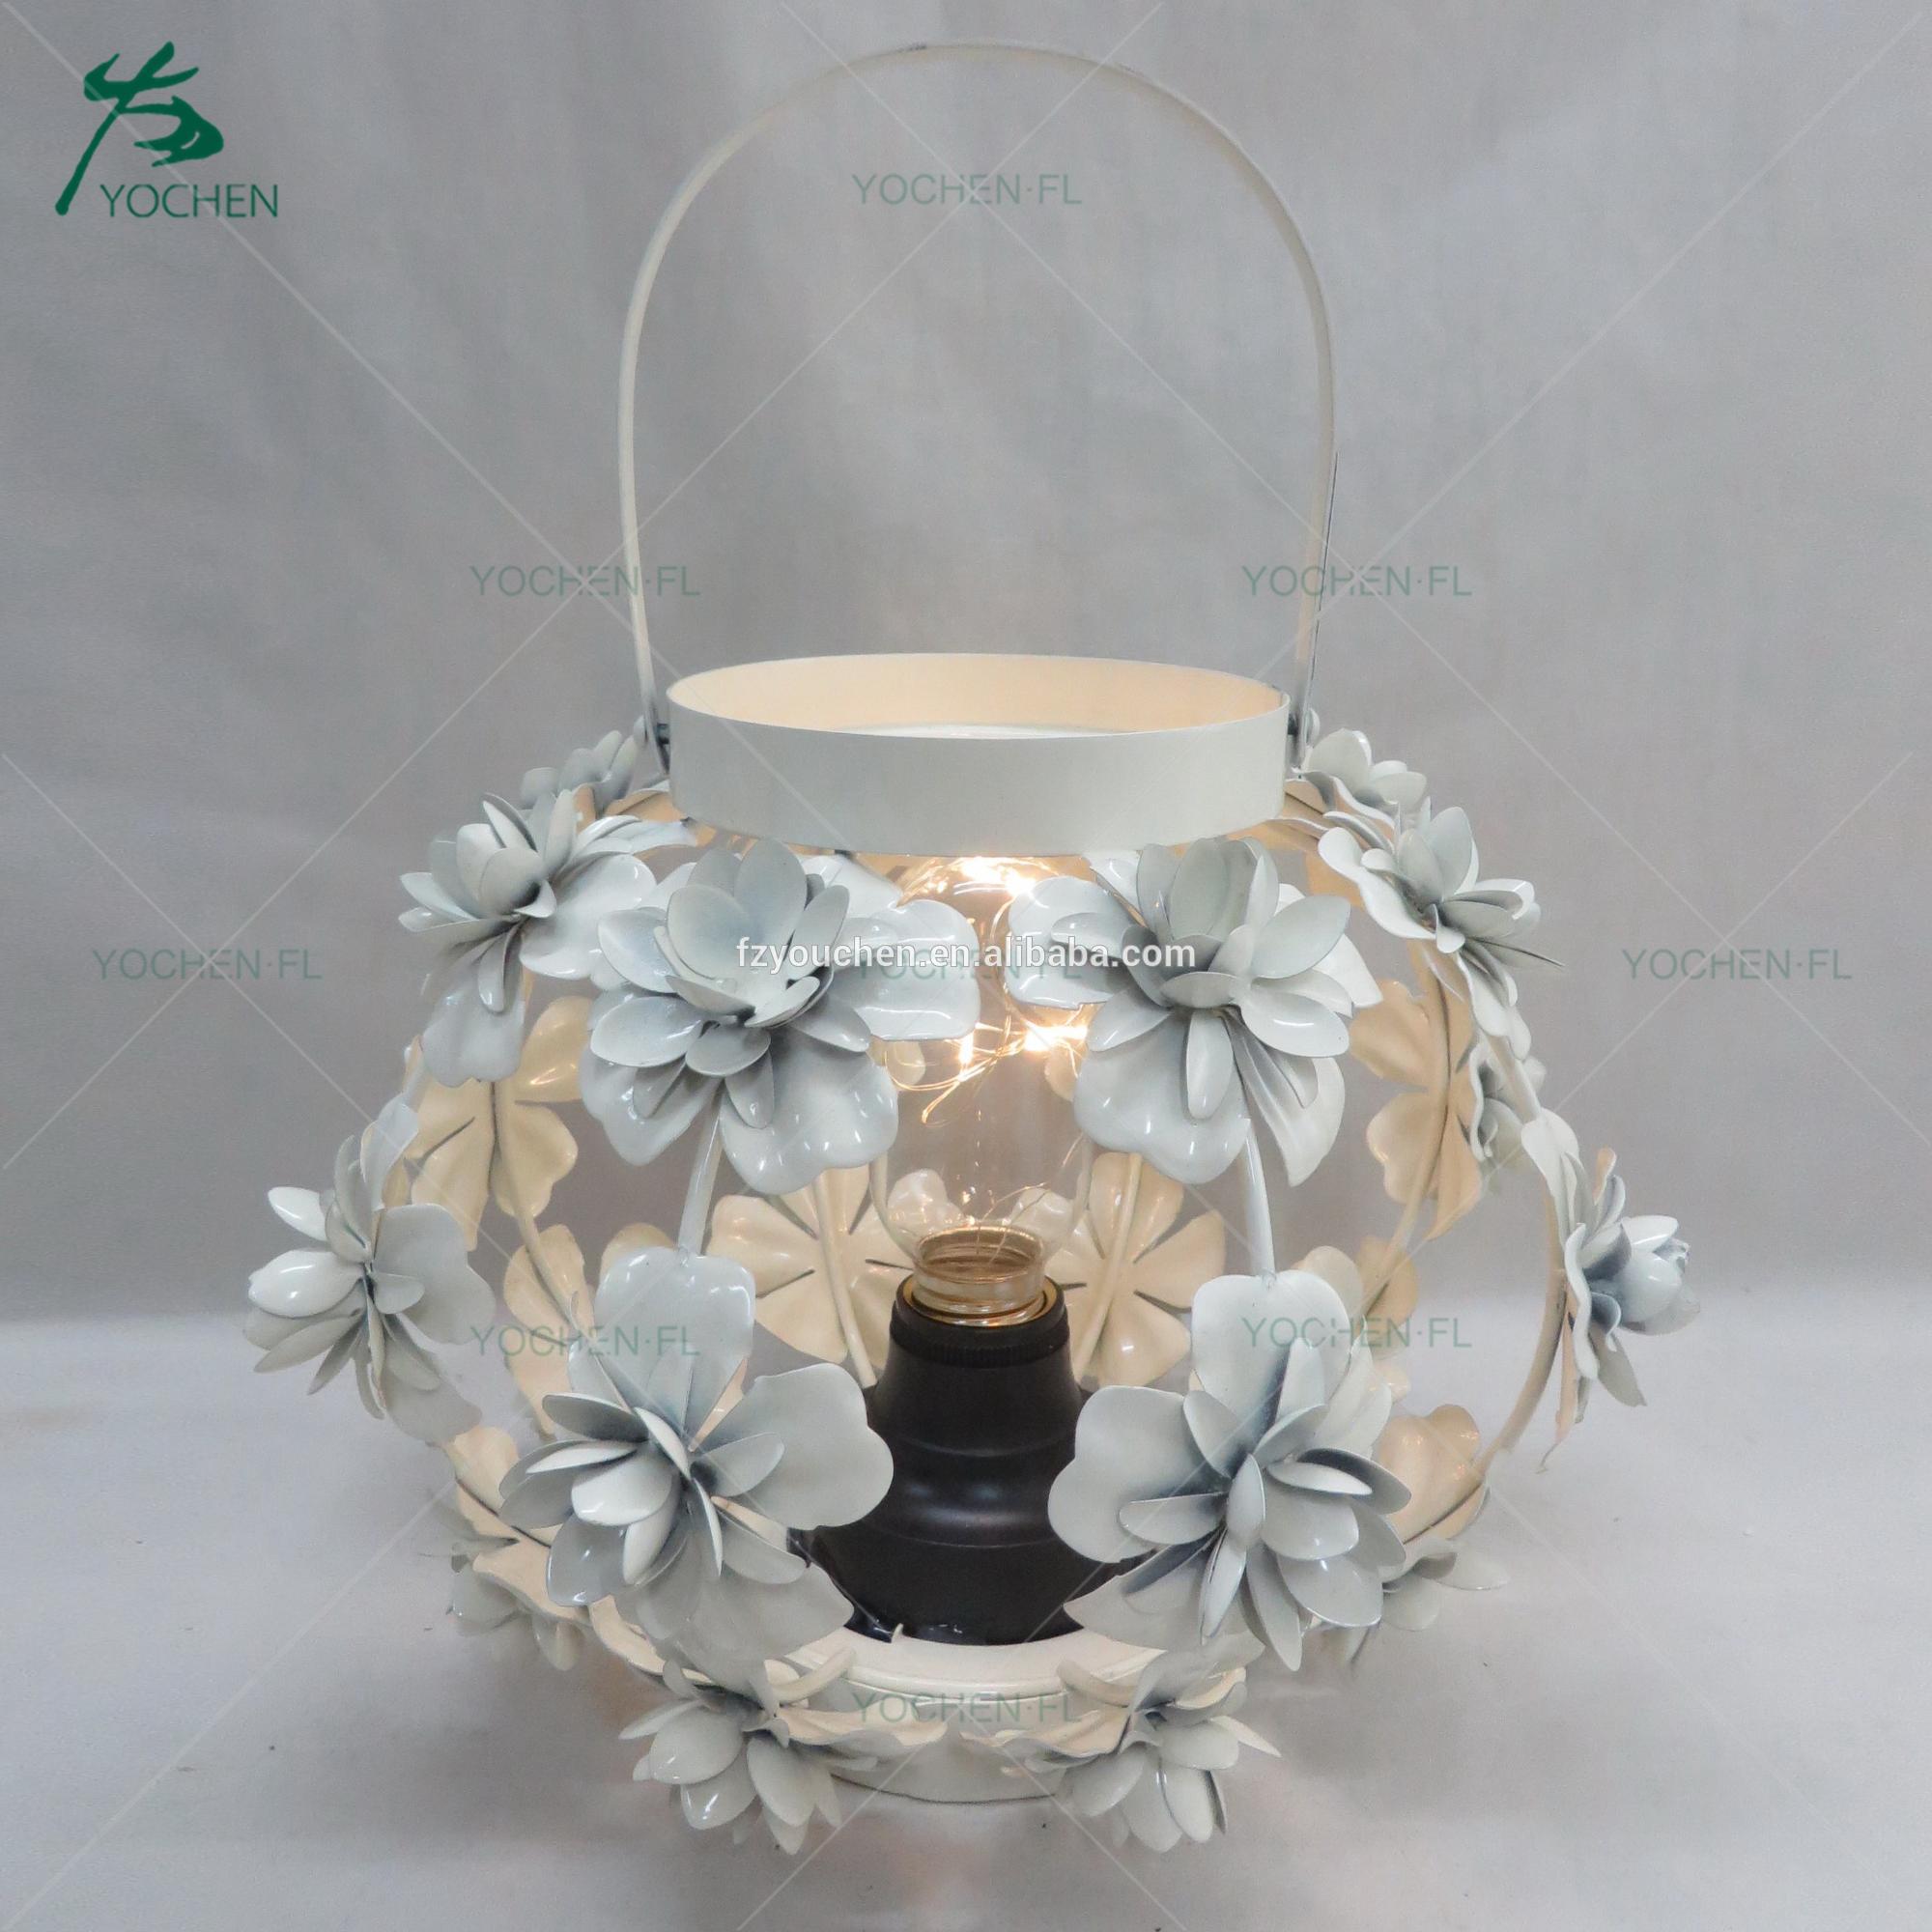 white flower pattern decorative centerpiece with LED light